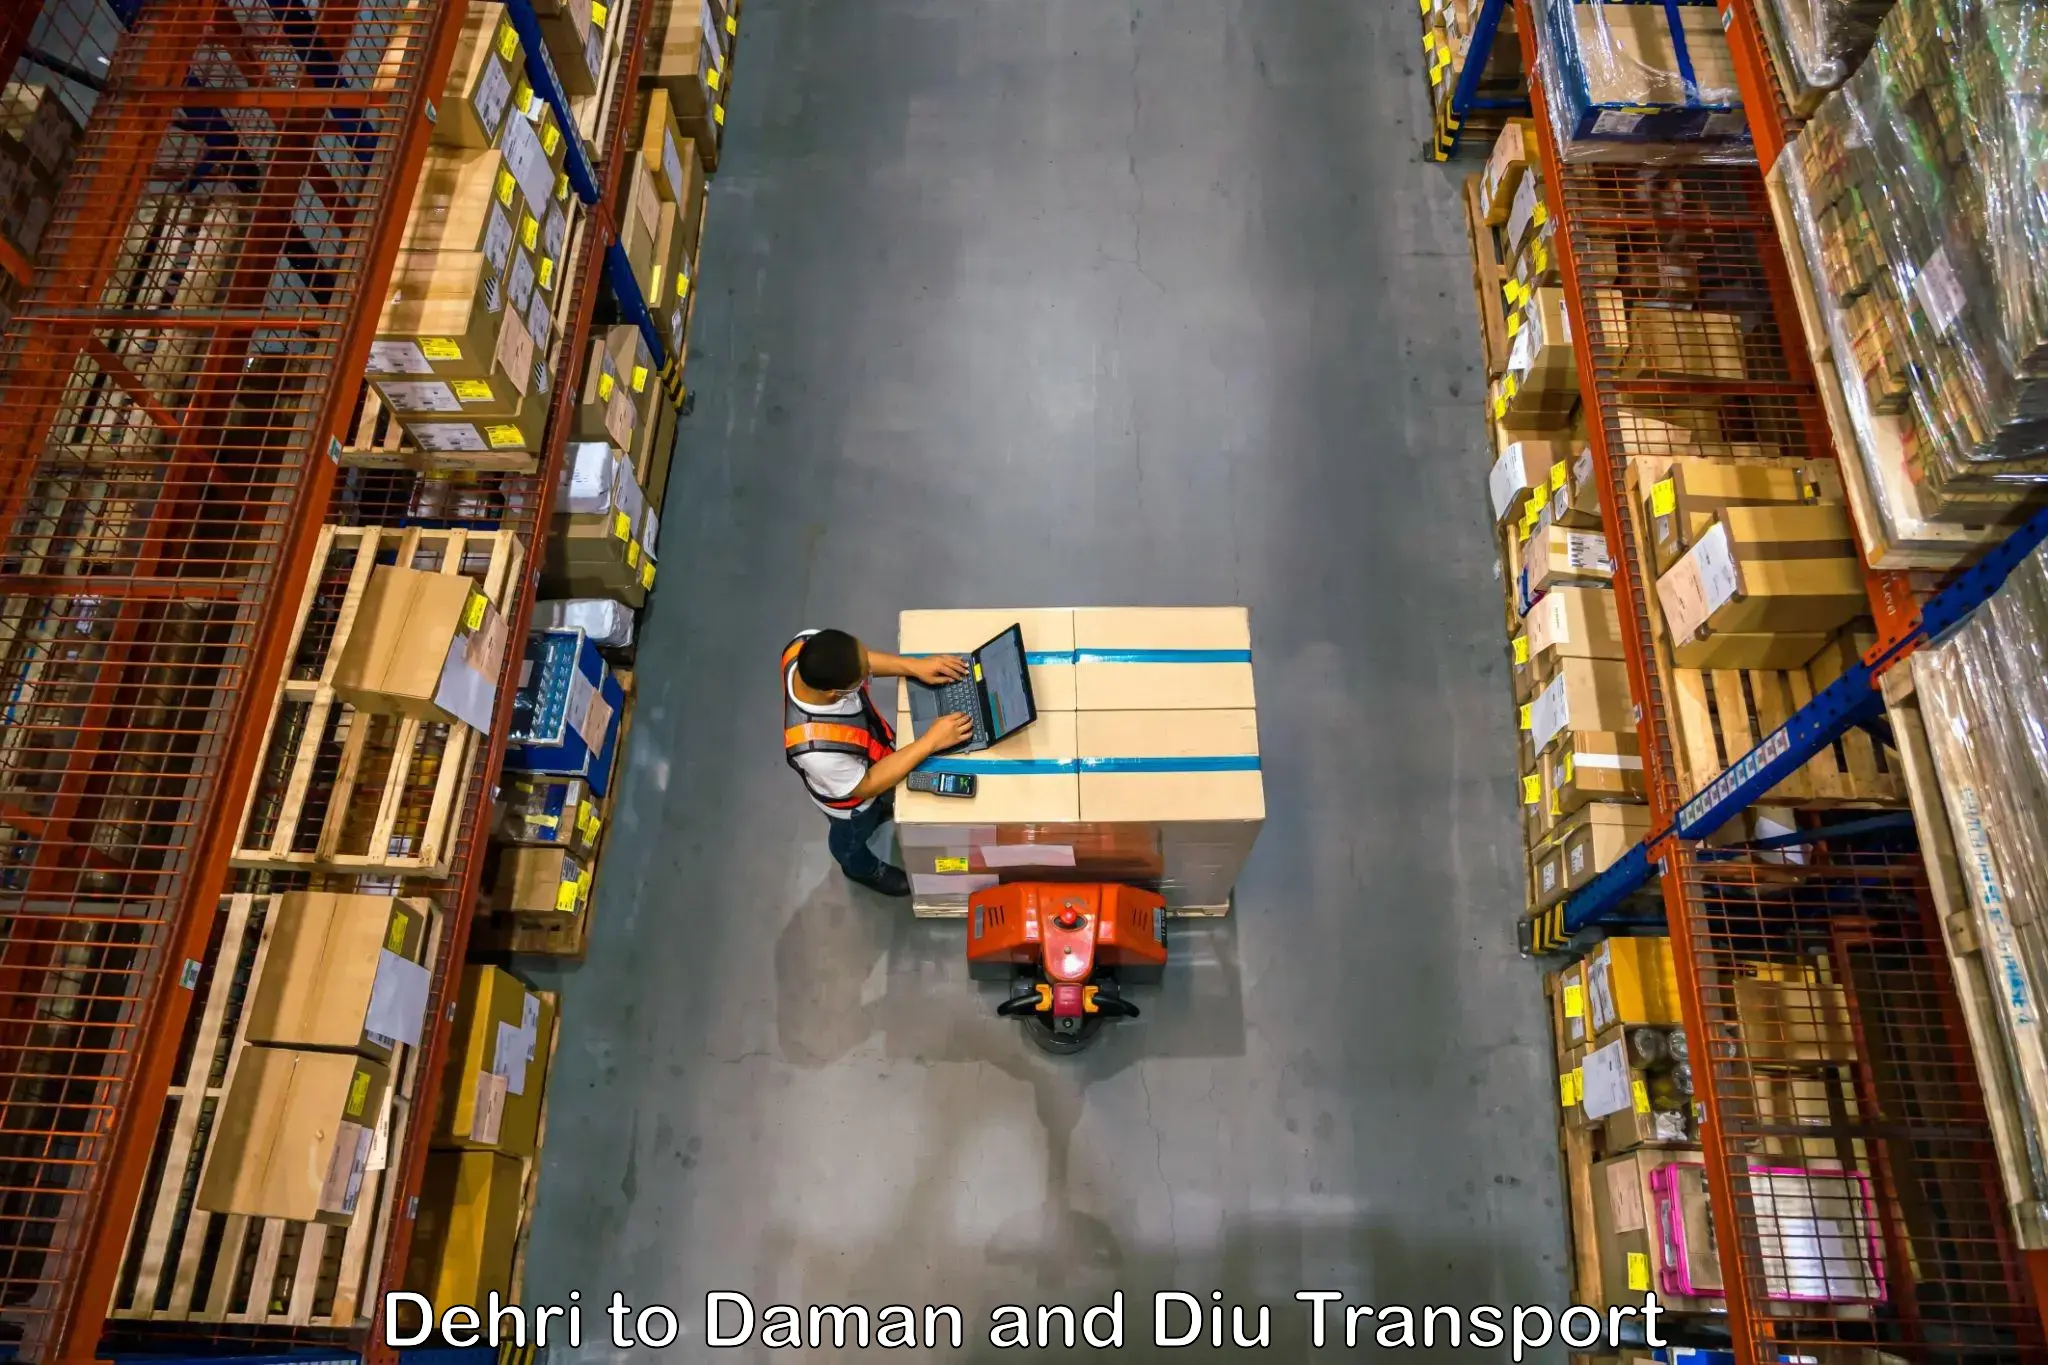 Part load transport service in India Dehri to Daman and Diu